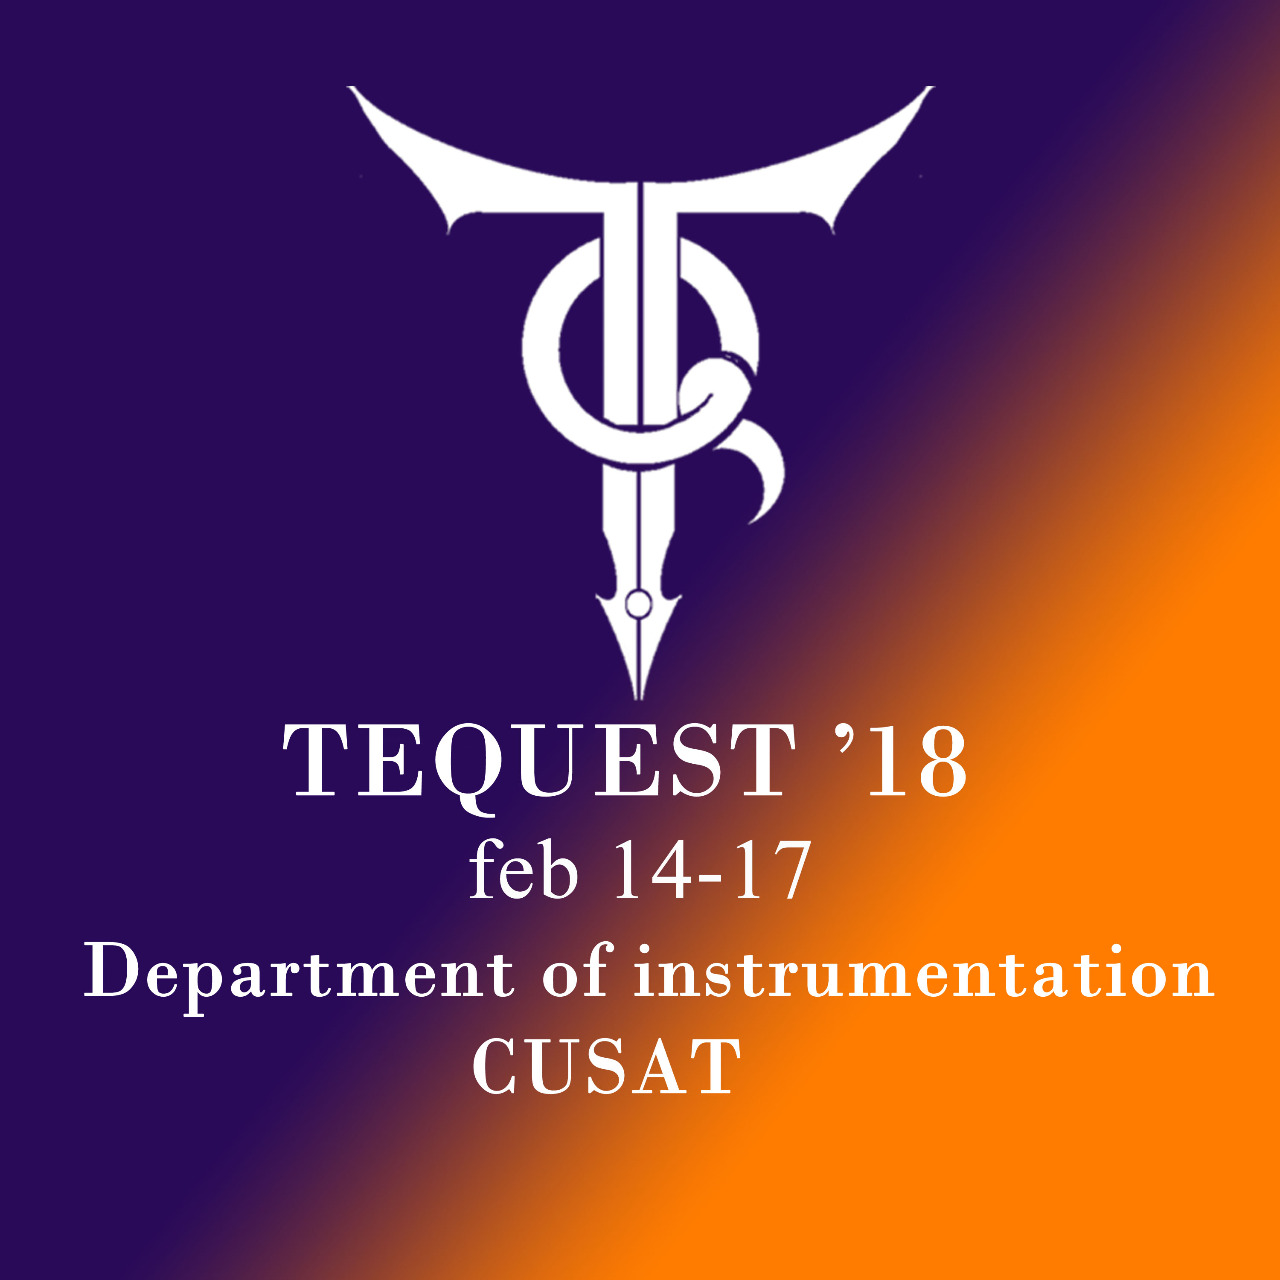 TeQuest 2018